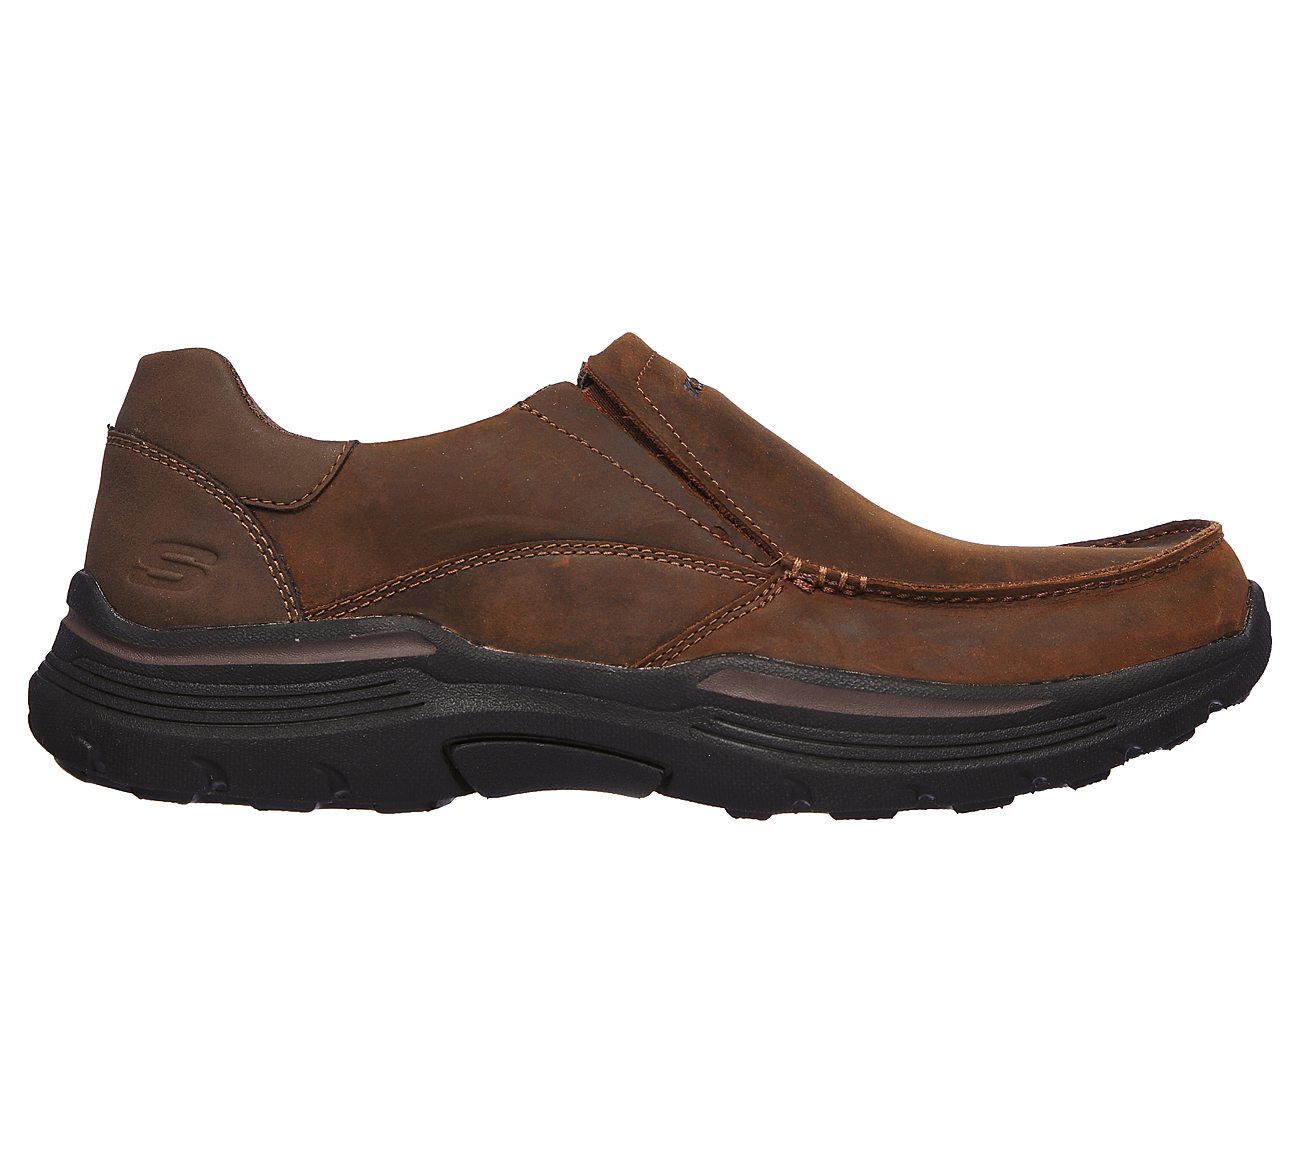 Buy SKECHERS Relaxed Fit: Expended - Helano USA Casuals Shoes